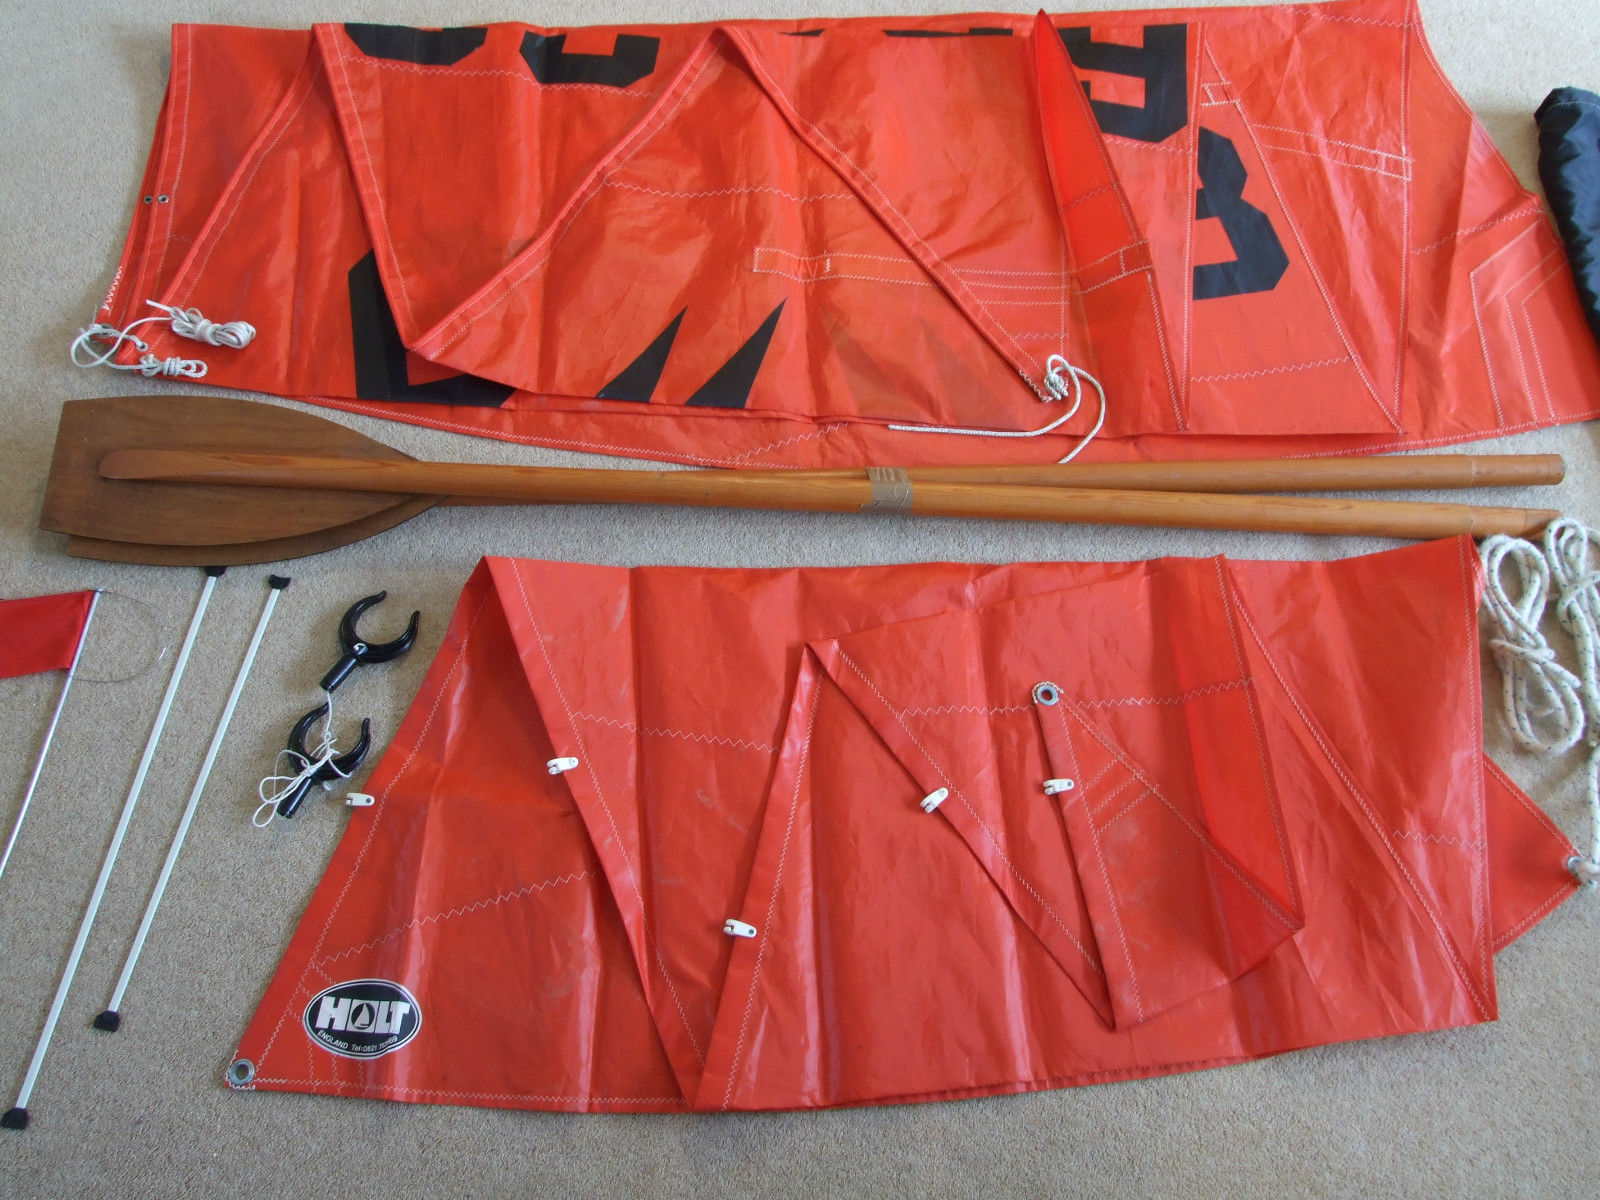 A pair of Mirror oars plus some rowlocks, folded sails, sail battens and a burgee laid out on a carpet